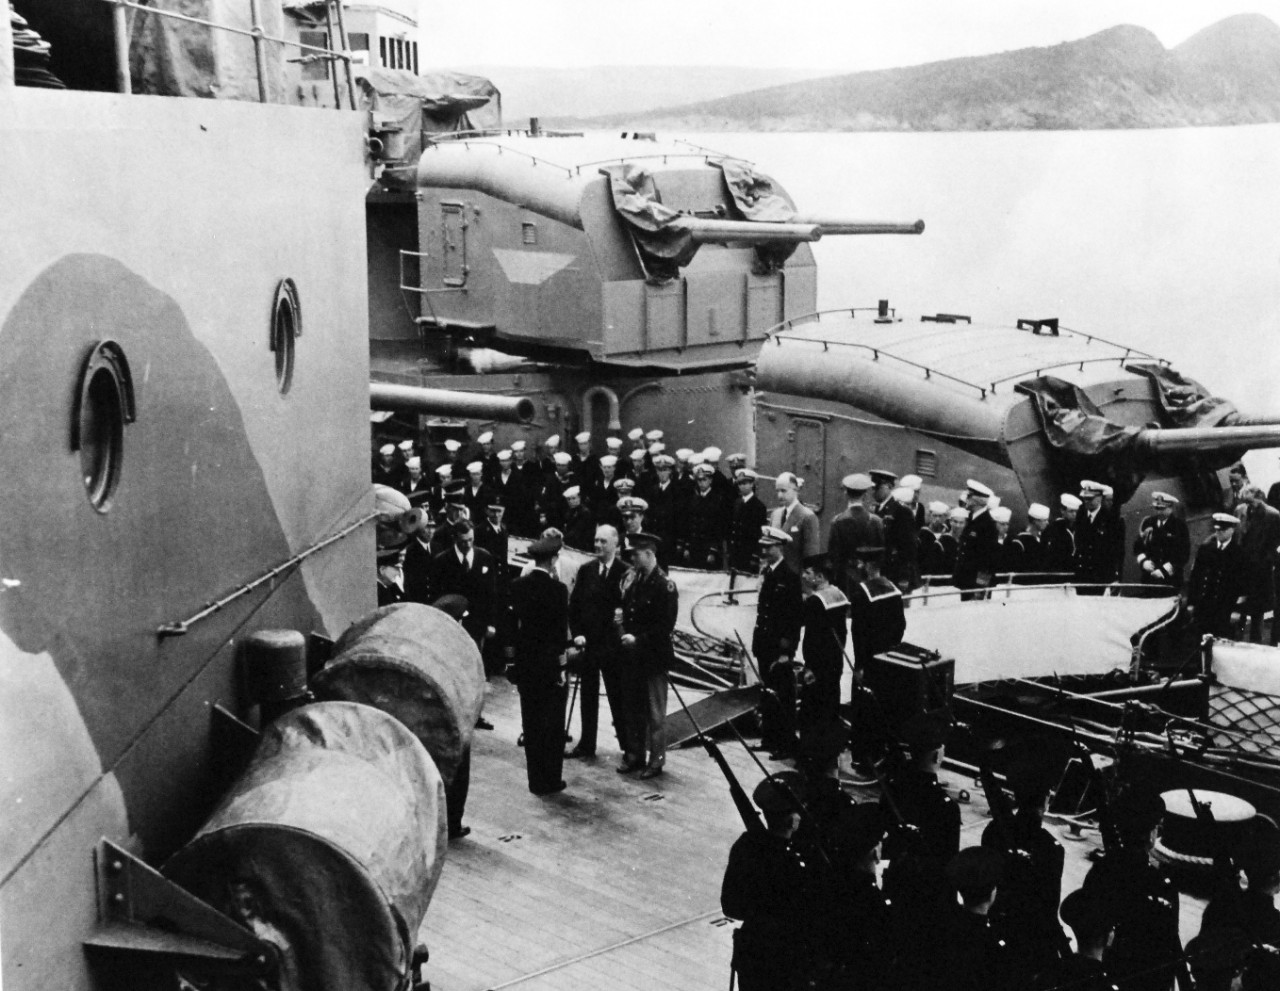 80-G-26883: Atlantic Charter, August 1941.  President Franklin D. Roosevelt and staff coming onboard HMS Prince of Wales from USS Augusta (CA-31) during the Atlantic Charter meeting.  Photograph released August 1941.   Official U.S. Navy Photograph, now in the collections of the National Archives.  (2016/03/22).